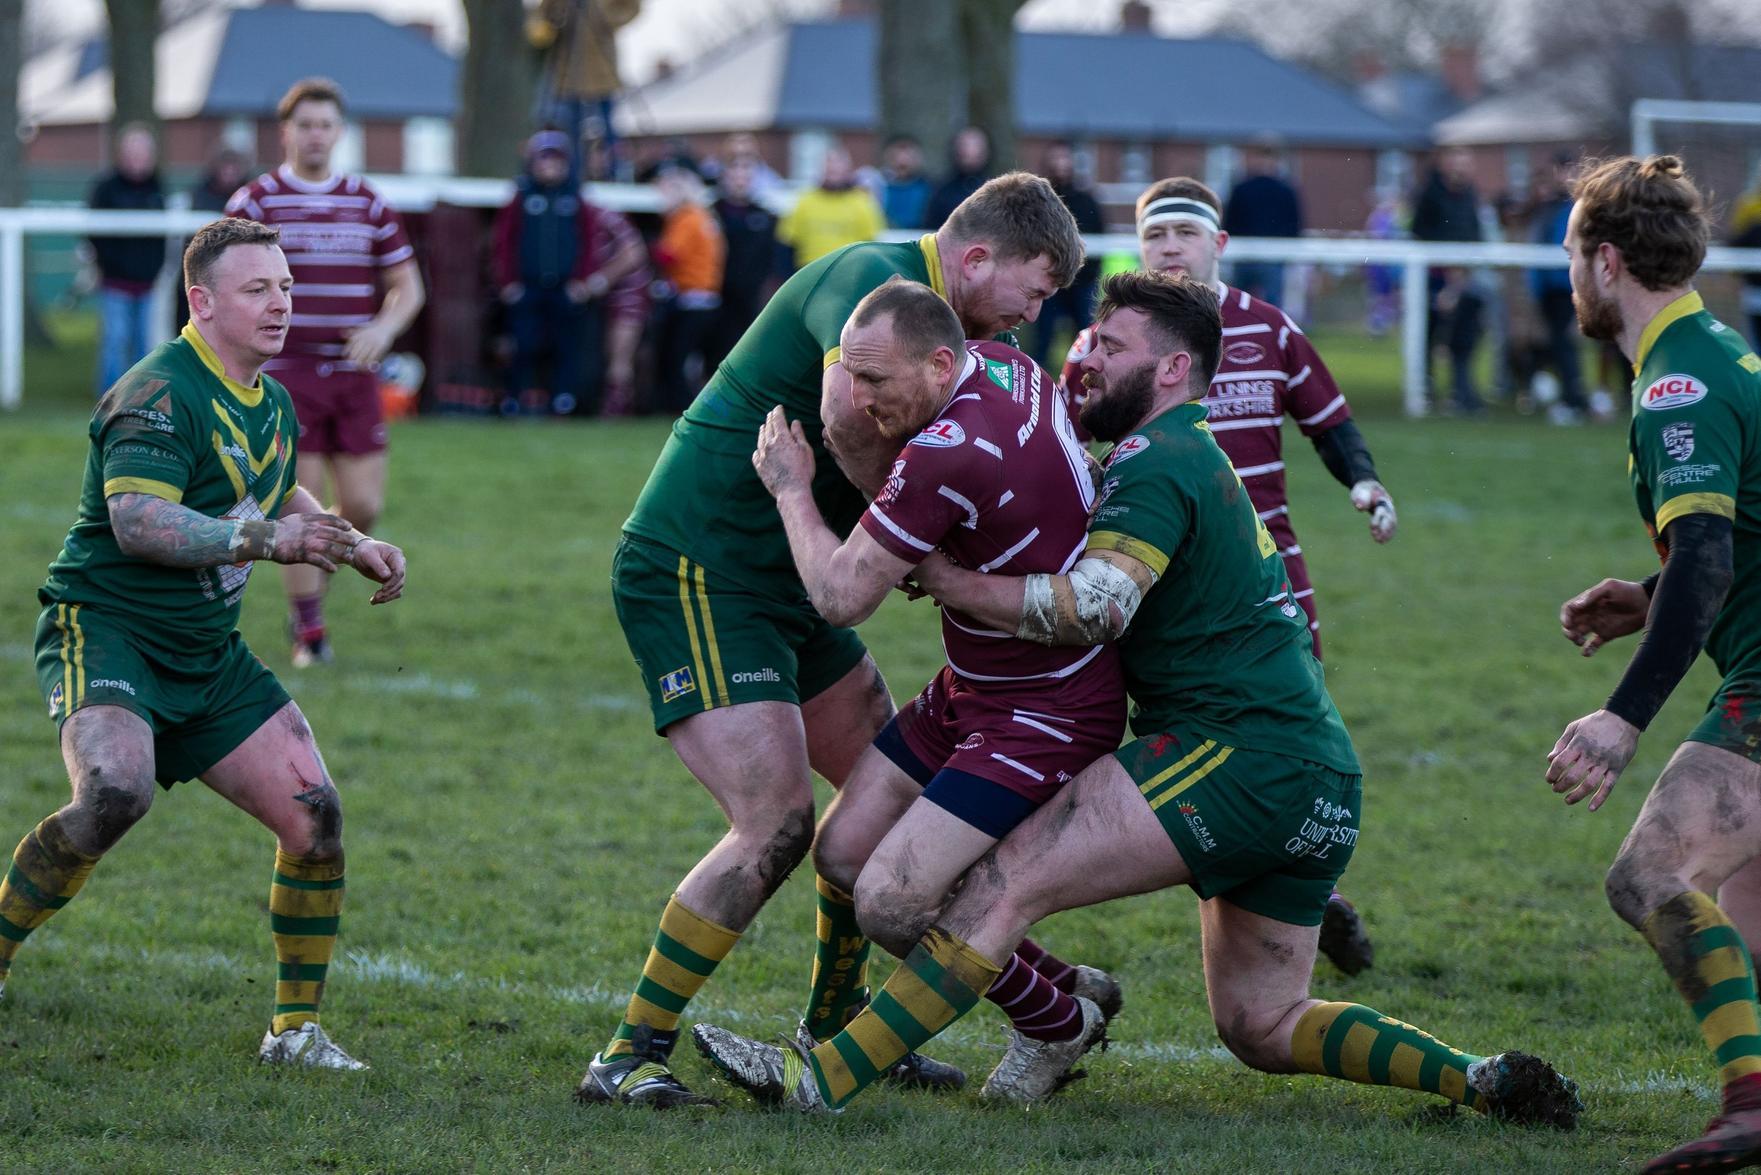 Late tries see off Thornhill Trojans in crucial National Conference Premier clash